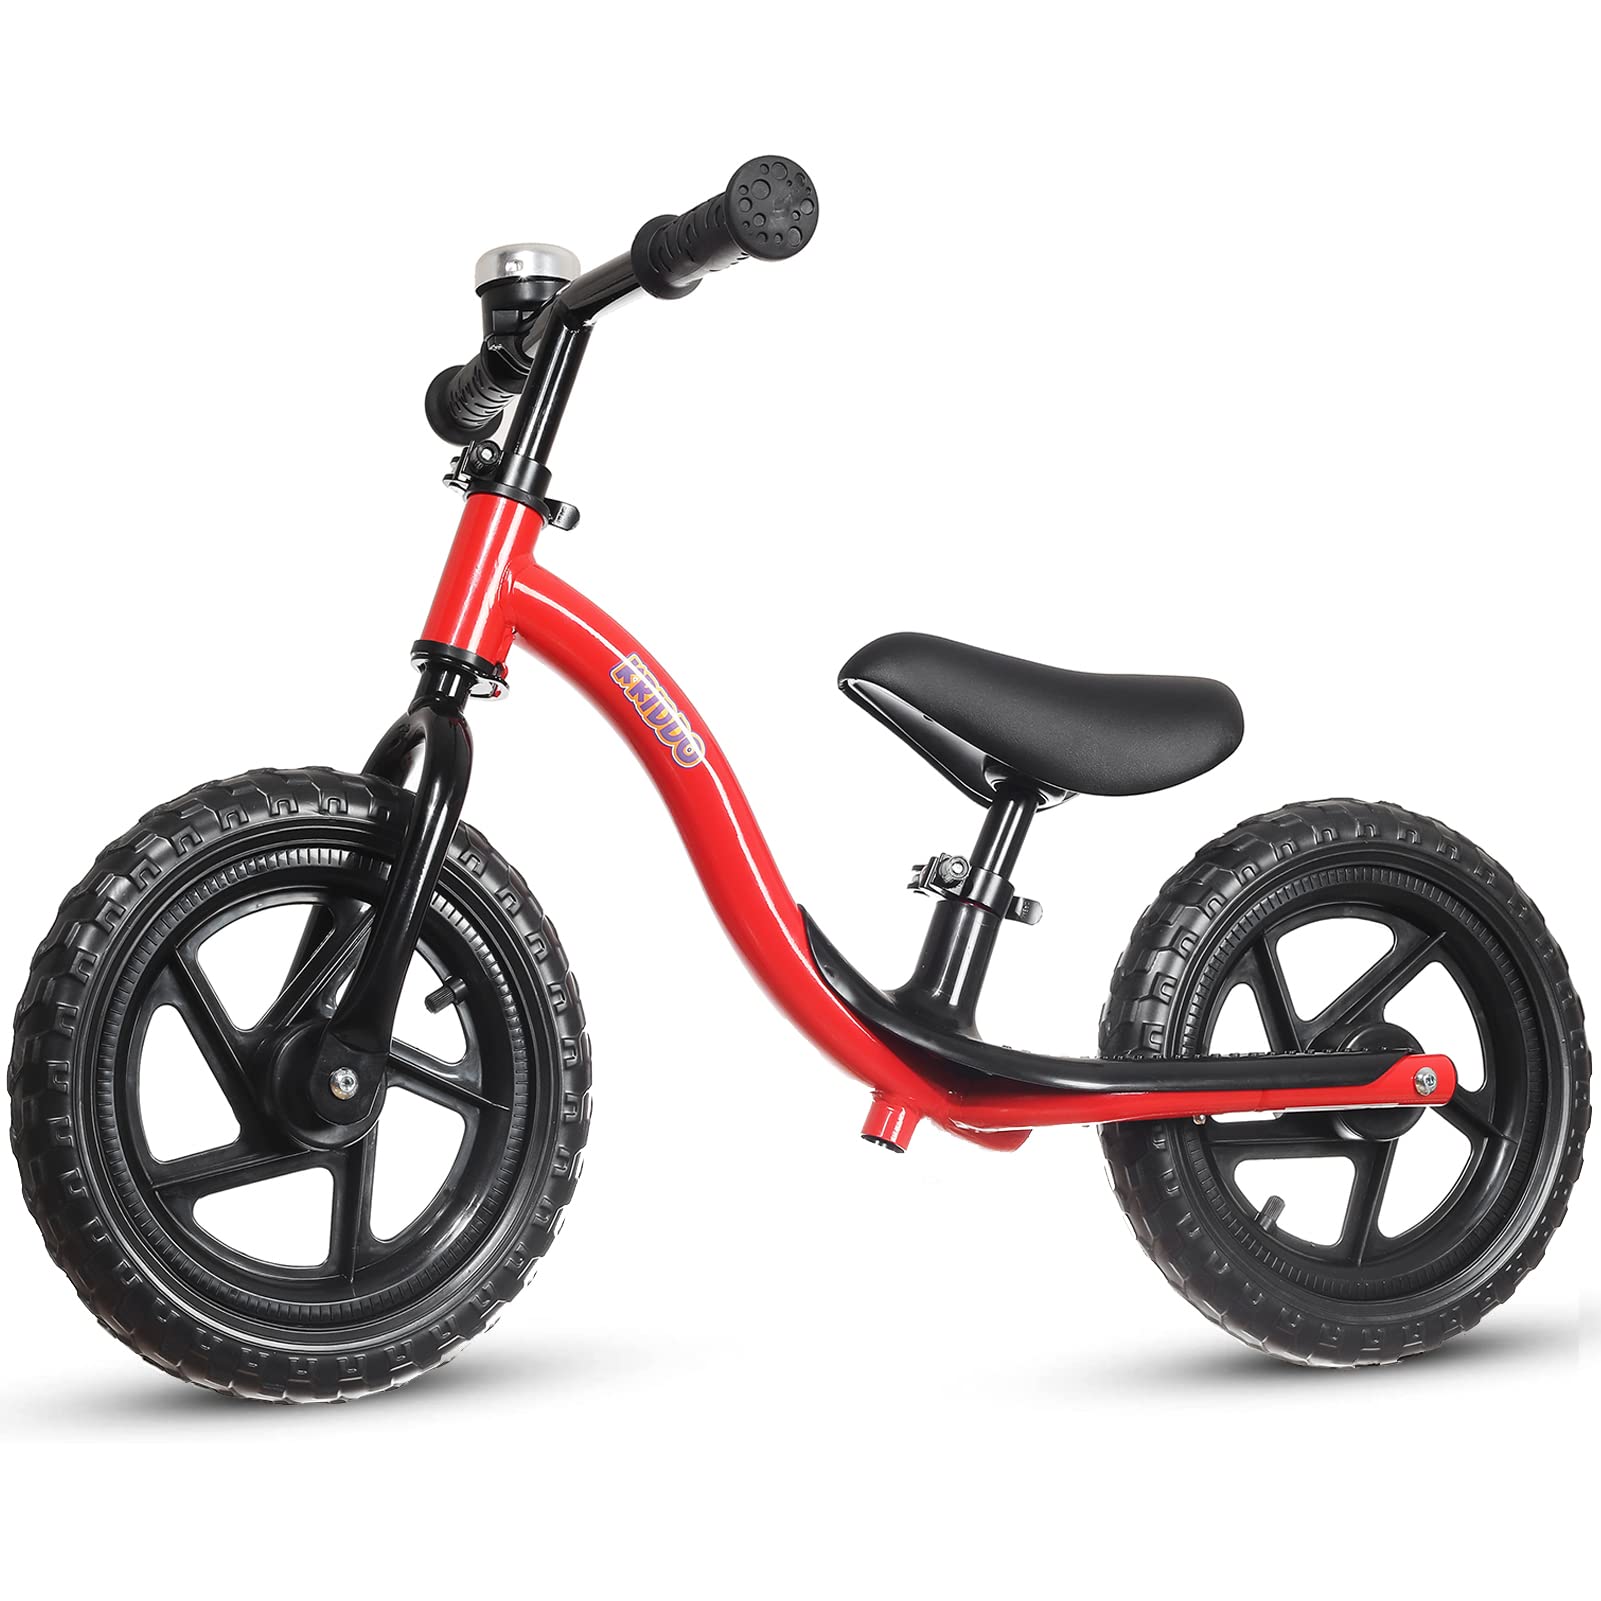 KRIDDO Toddler Balance Bike 2 Year Old, Age 18 Months to 5 Years Old, Early Learning Interactive Push Bicycle with Steady Balancing and Footrest, Gift for 2-5 Boys Girls, Red